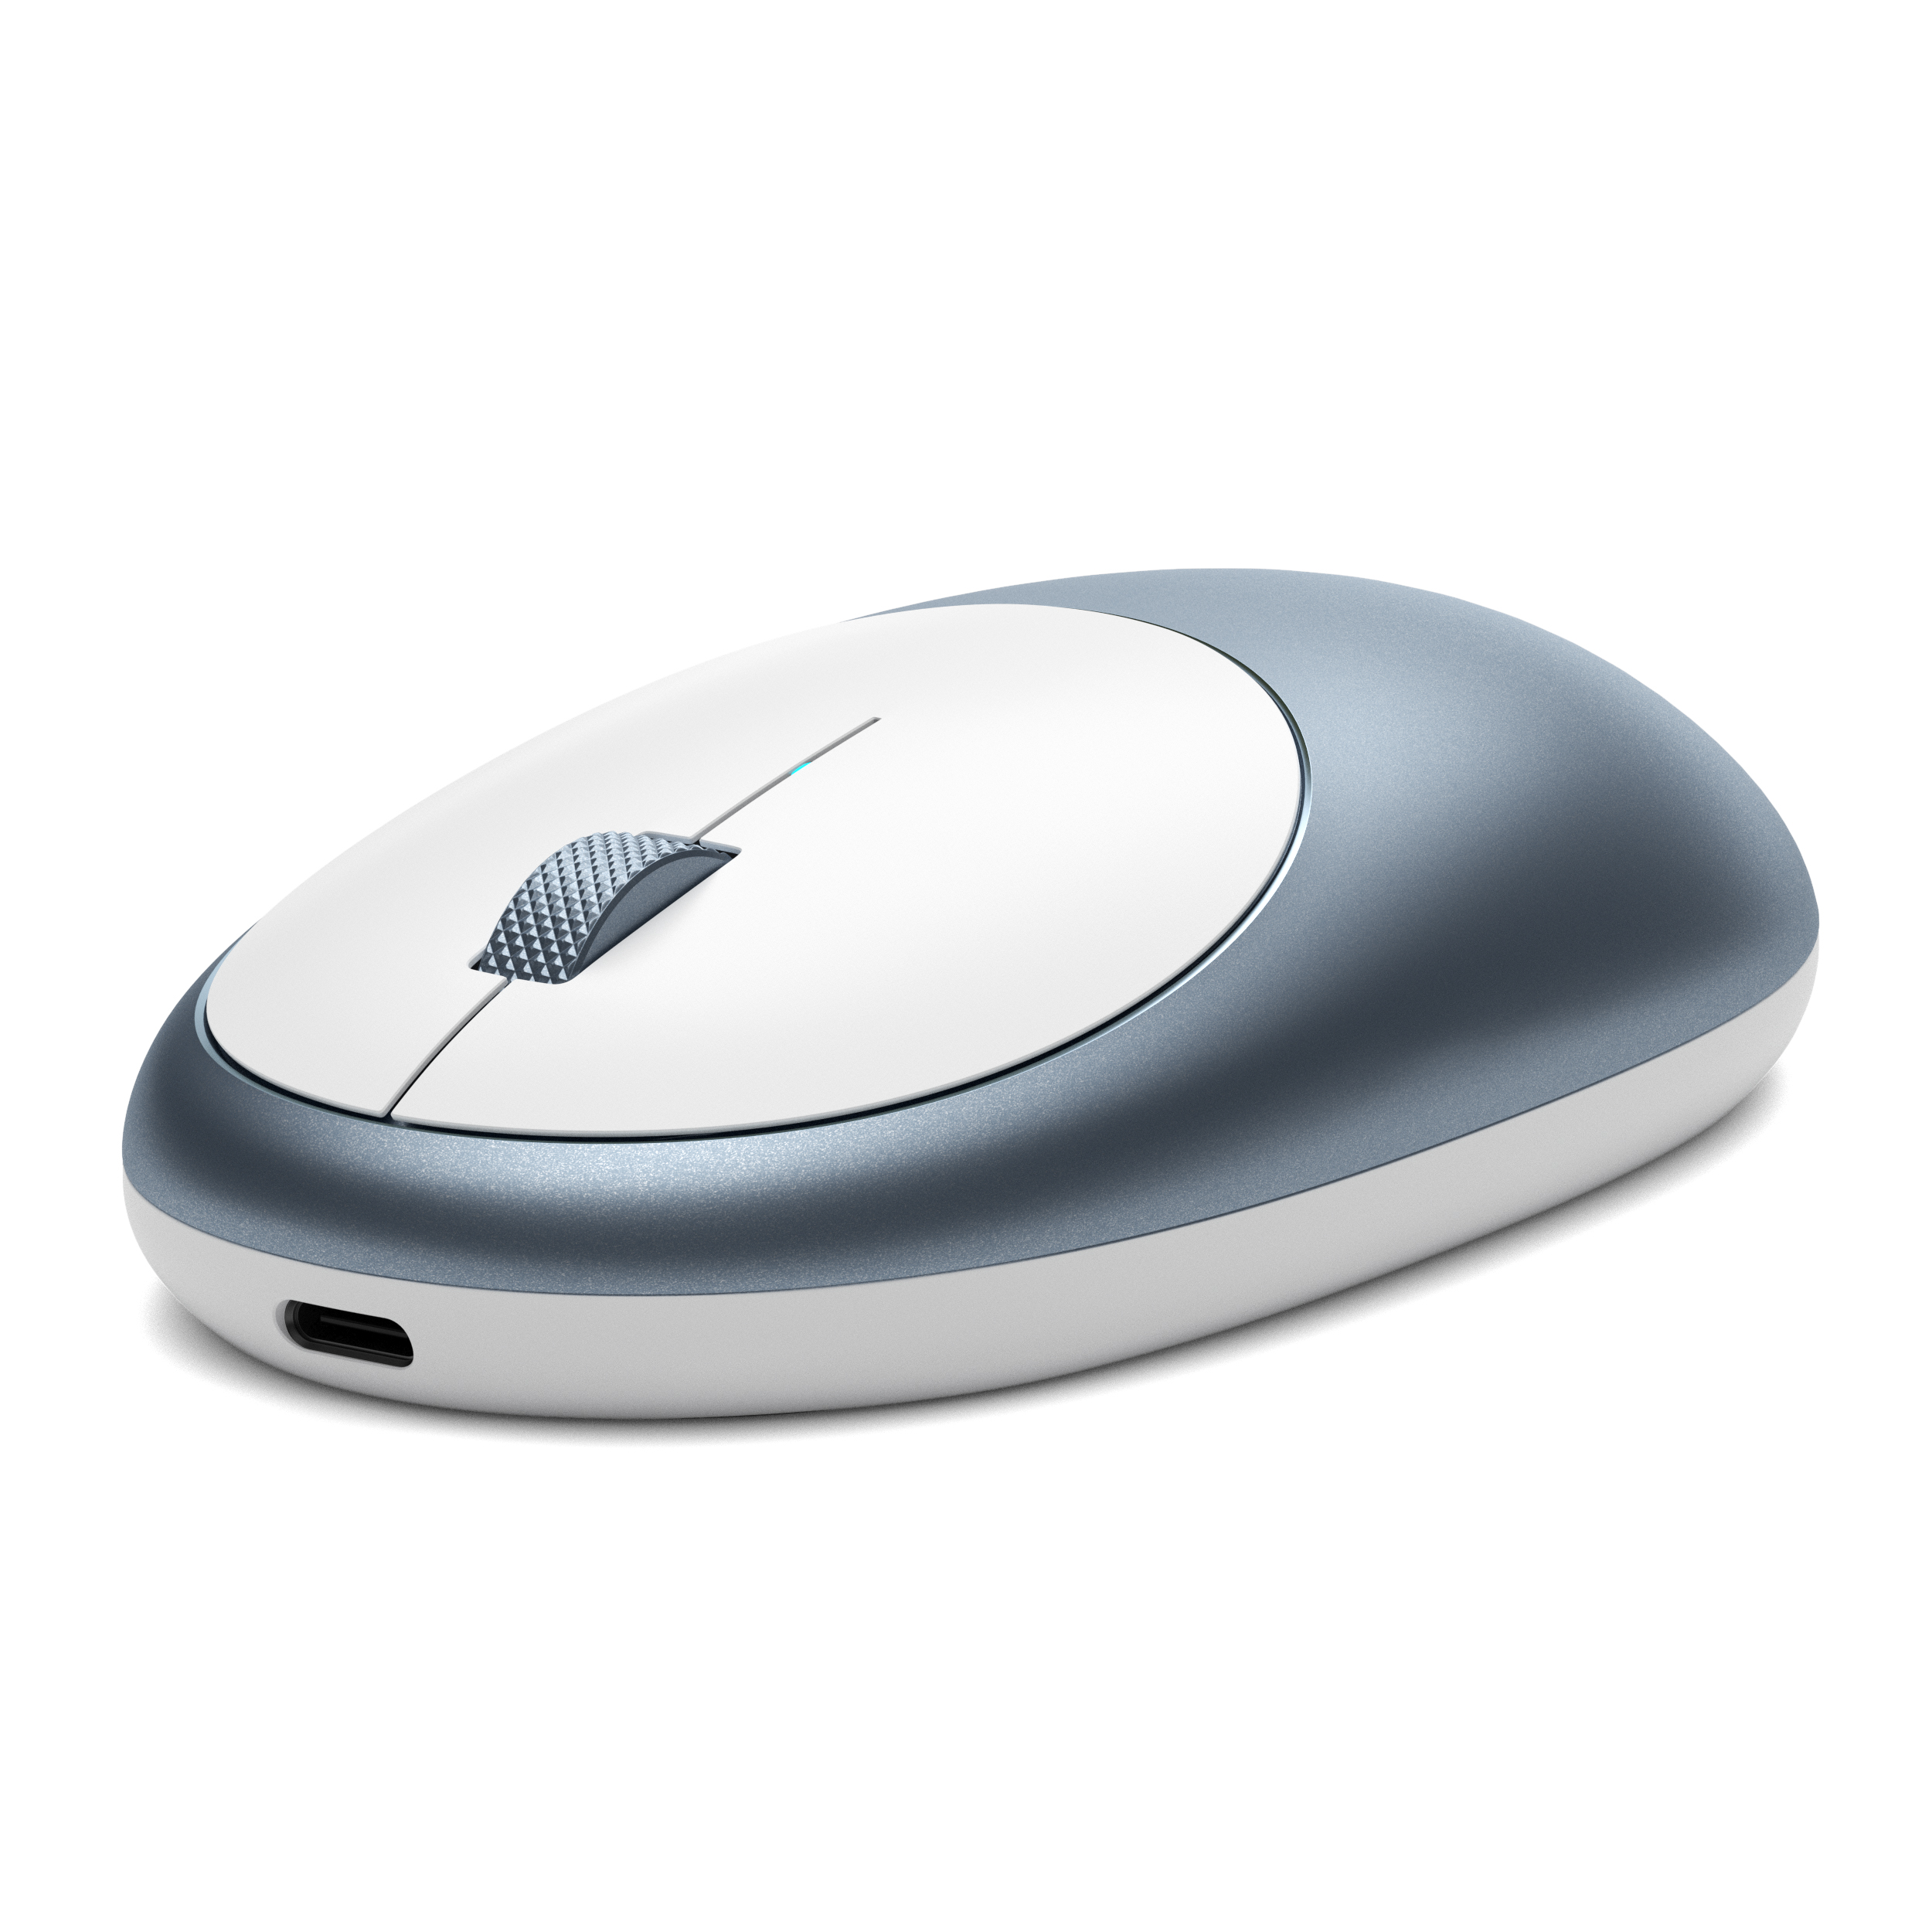 SATECHI M1 Bluetooth Wireless Blue Blue - Wireless Mouse, Mouse